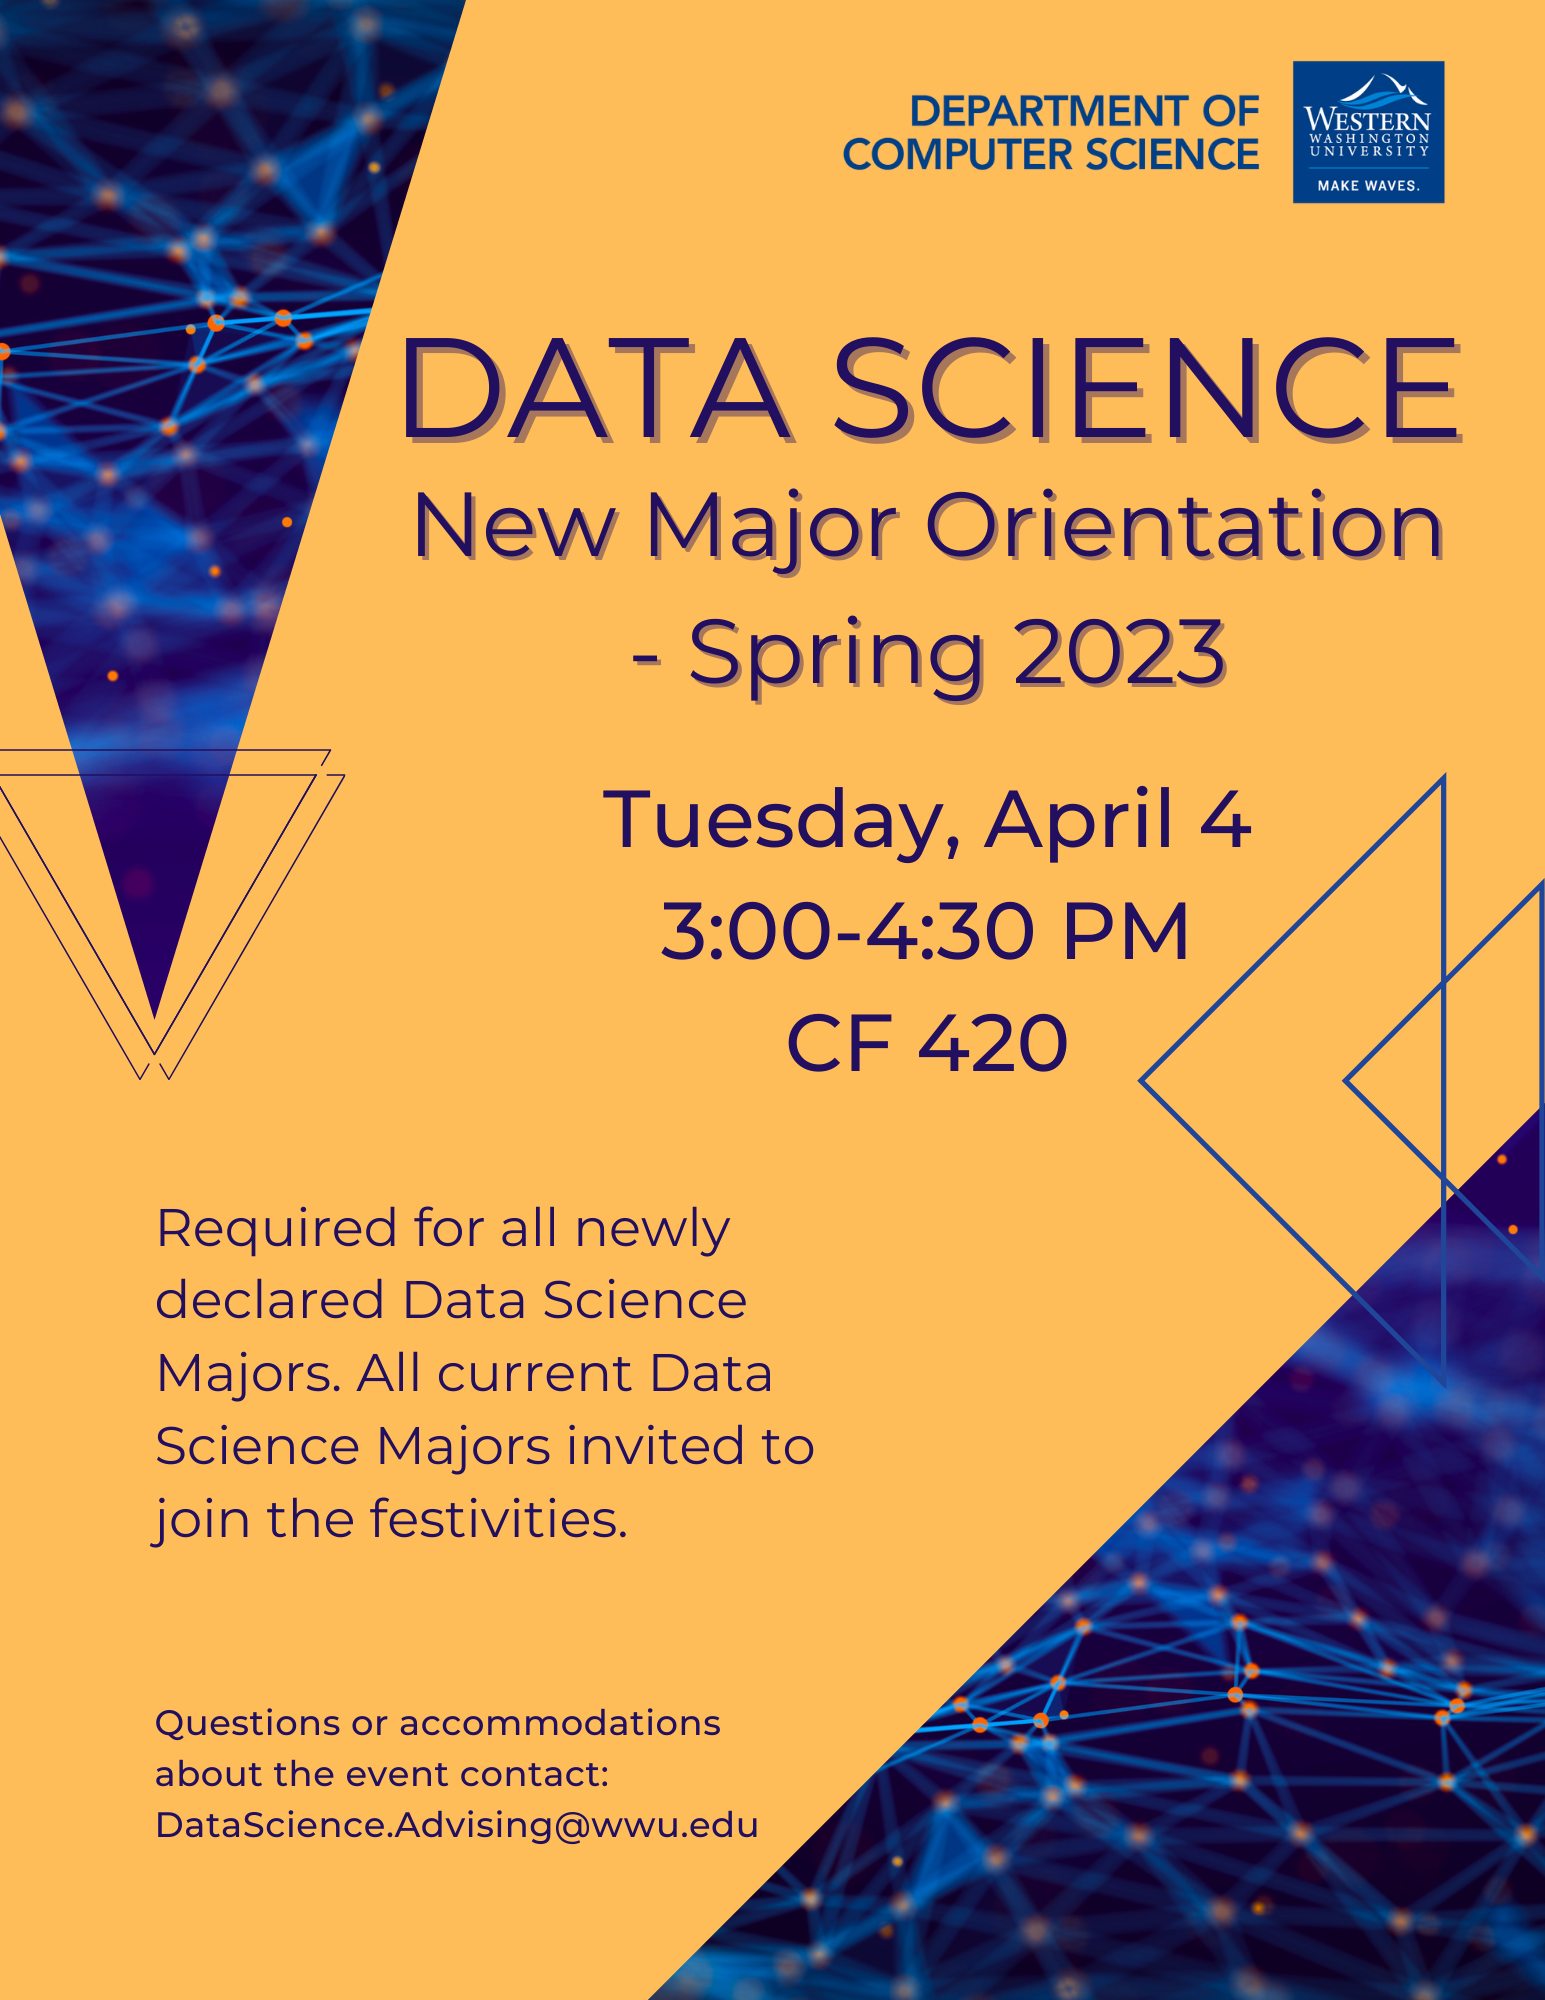 Data Science New Major Orientation for Spring 2023. Tuesday, April 4 from 3:00 to 4:30 PM, in CF 420.